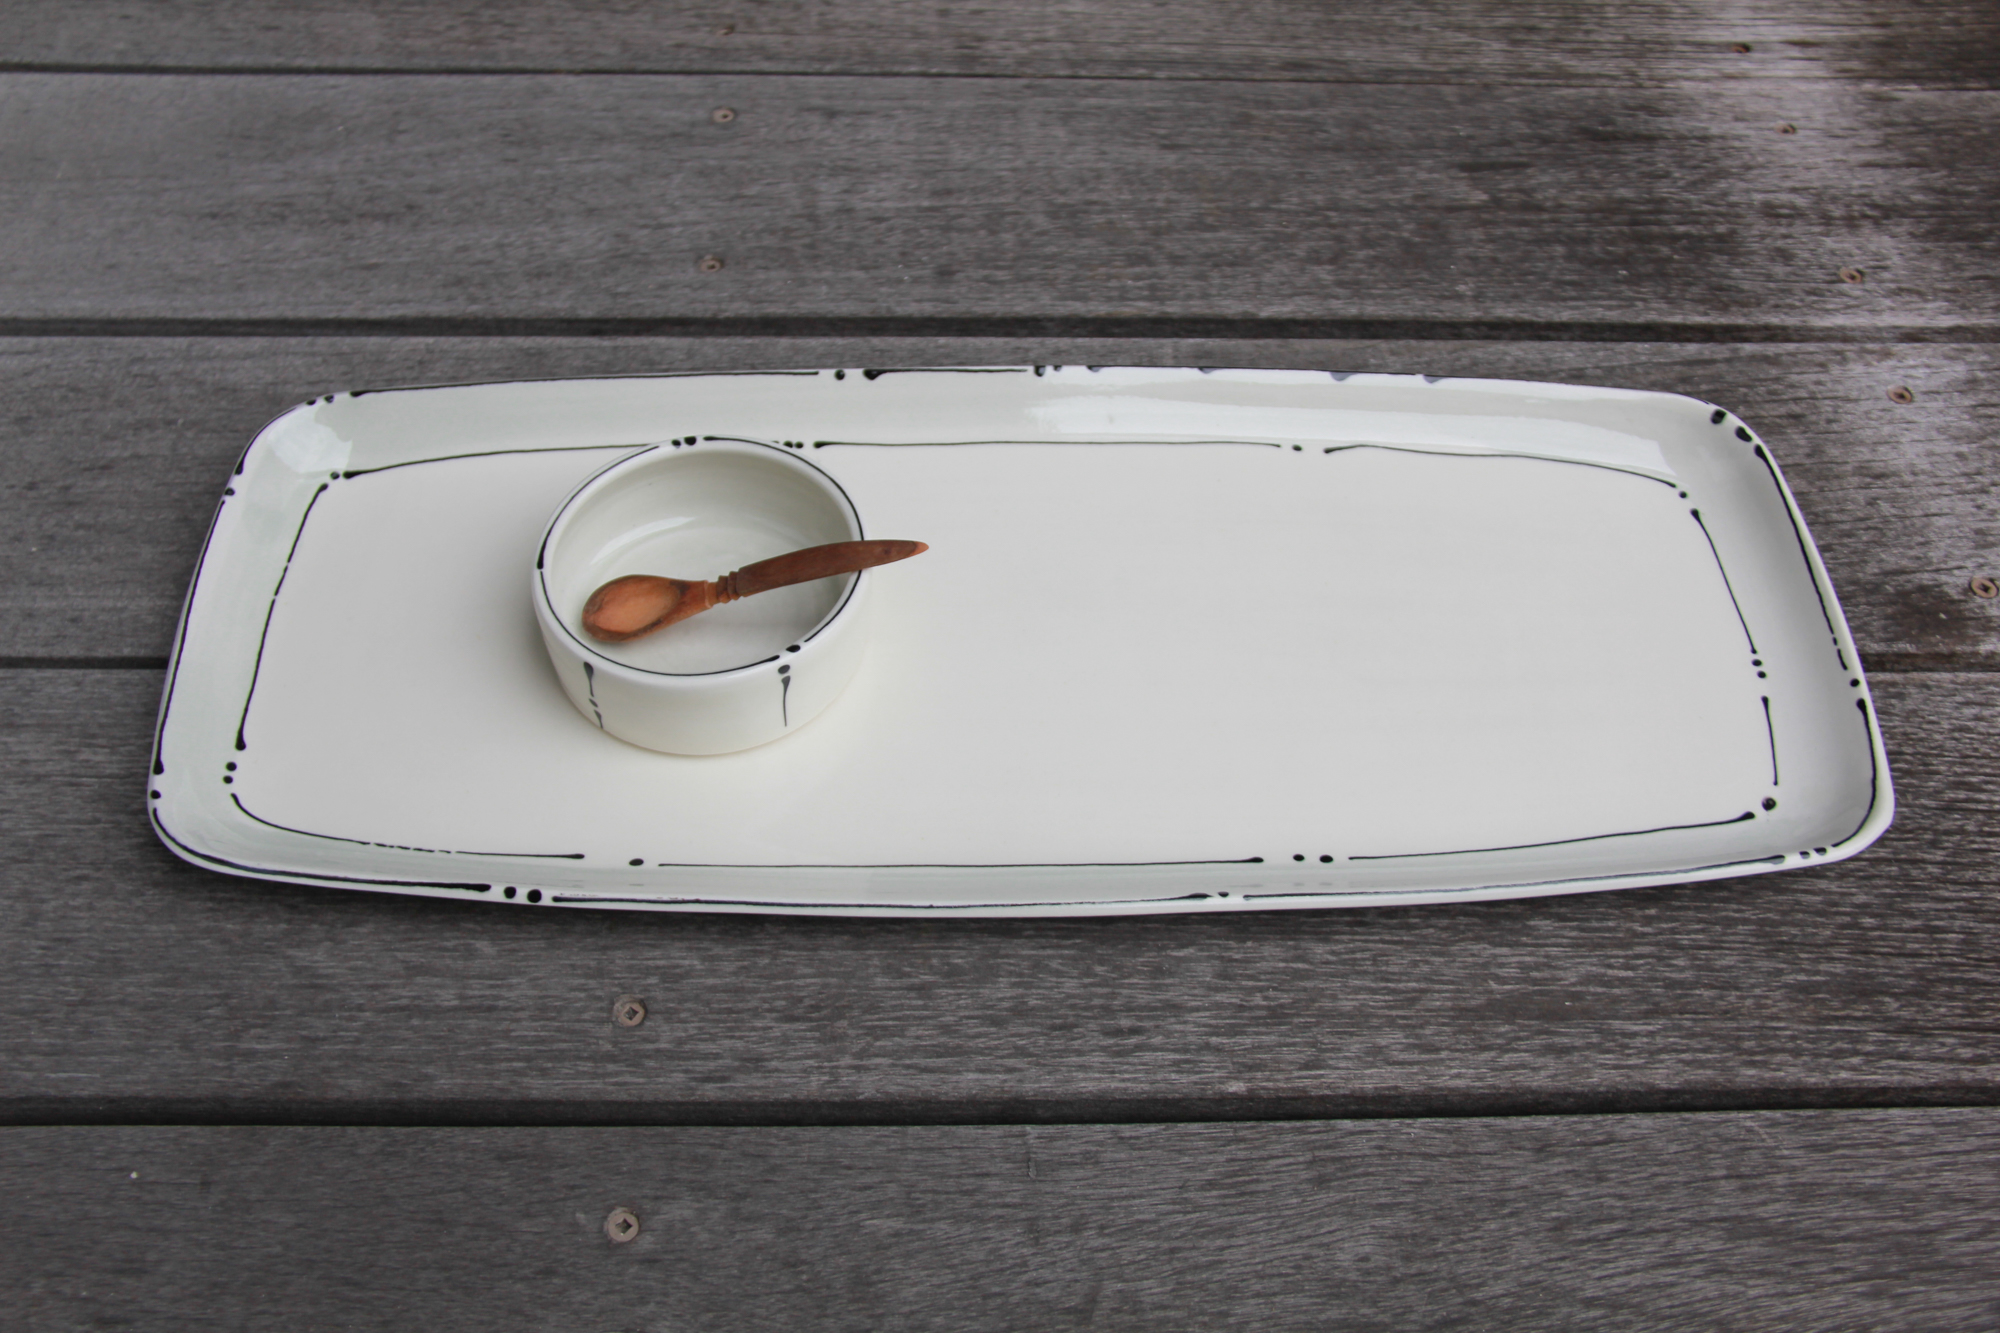 Iris Dorton: Large Tray with Circle Dot Motif, comes with Wood Spoon and Dish Product Image 1 of 7